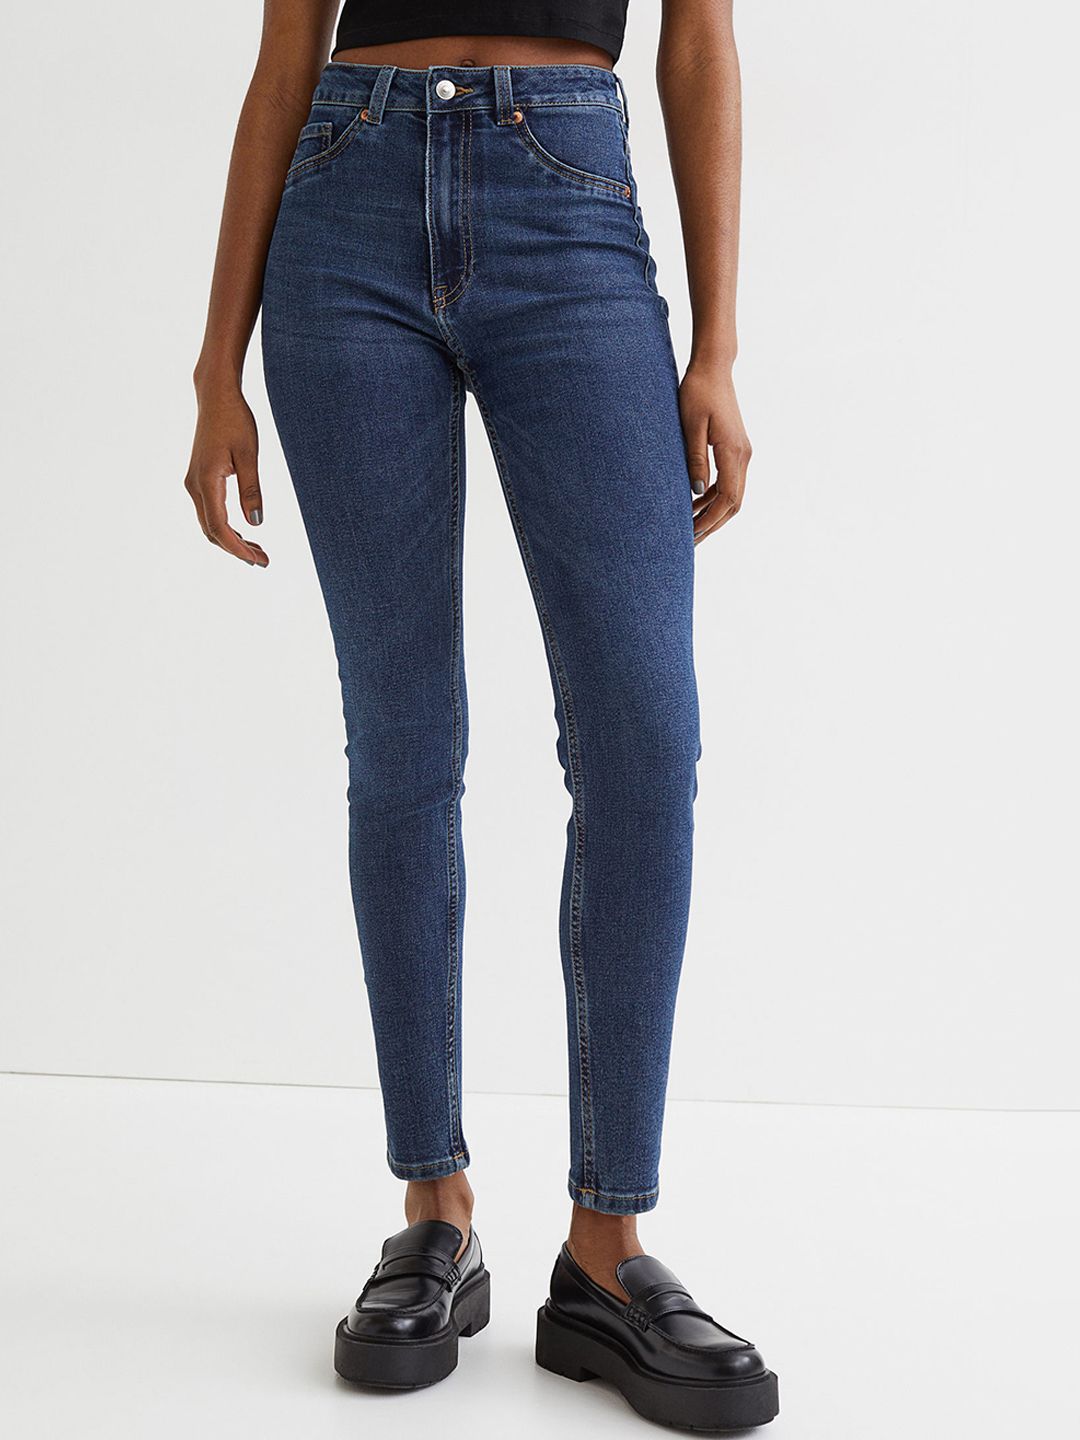 H&M Women Blue Skinny High Jeans Price in India